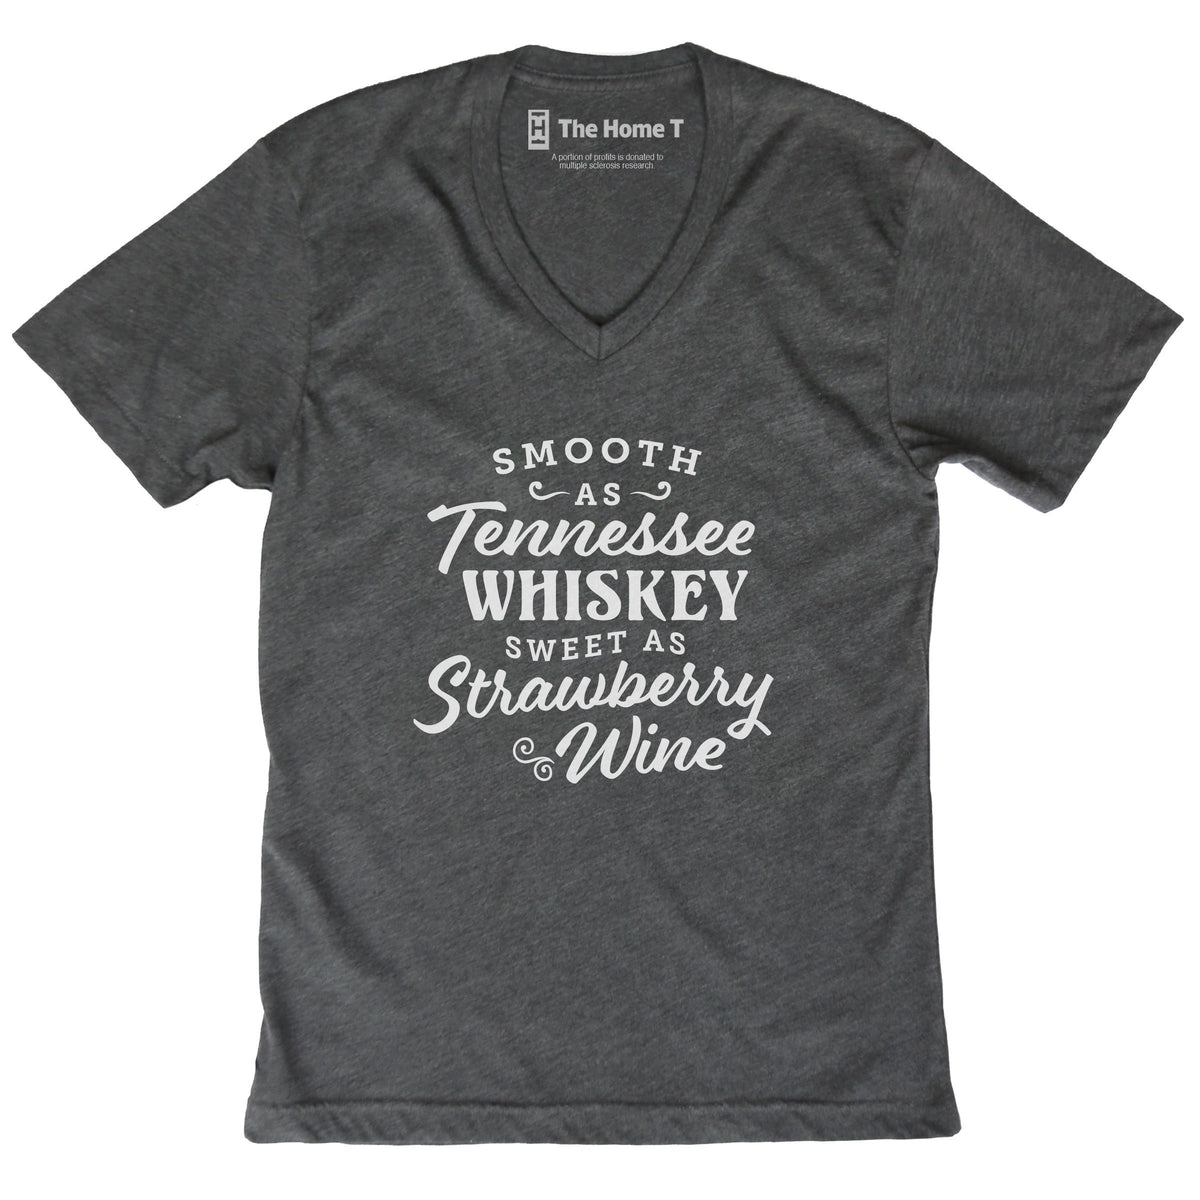 Smooth as Tennessee whiskey. Sweet as strawberry wine. Dark Grey V-Neck